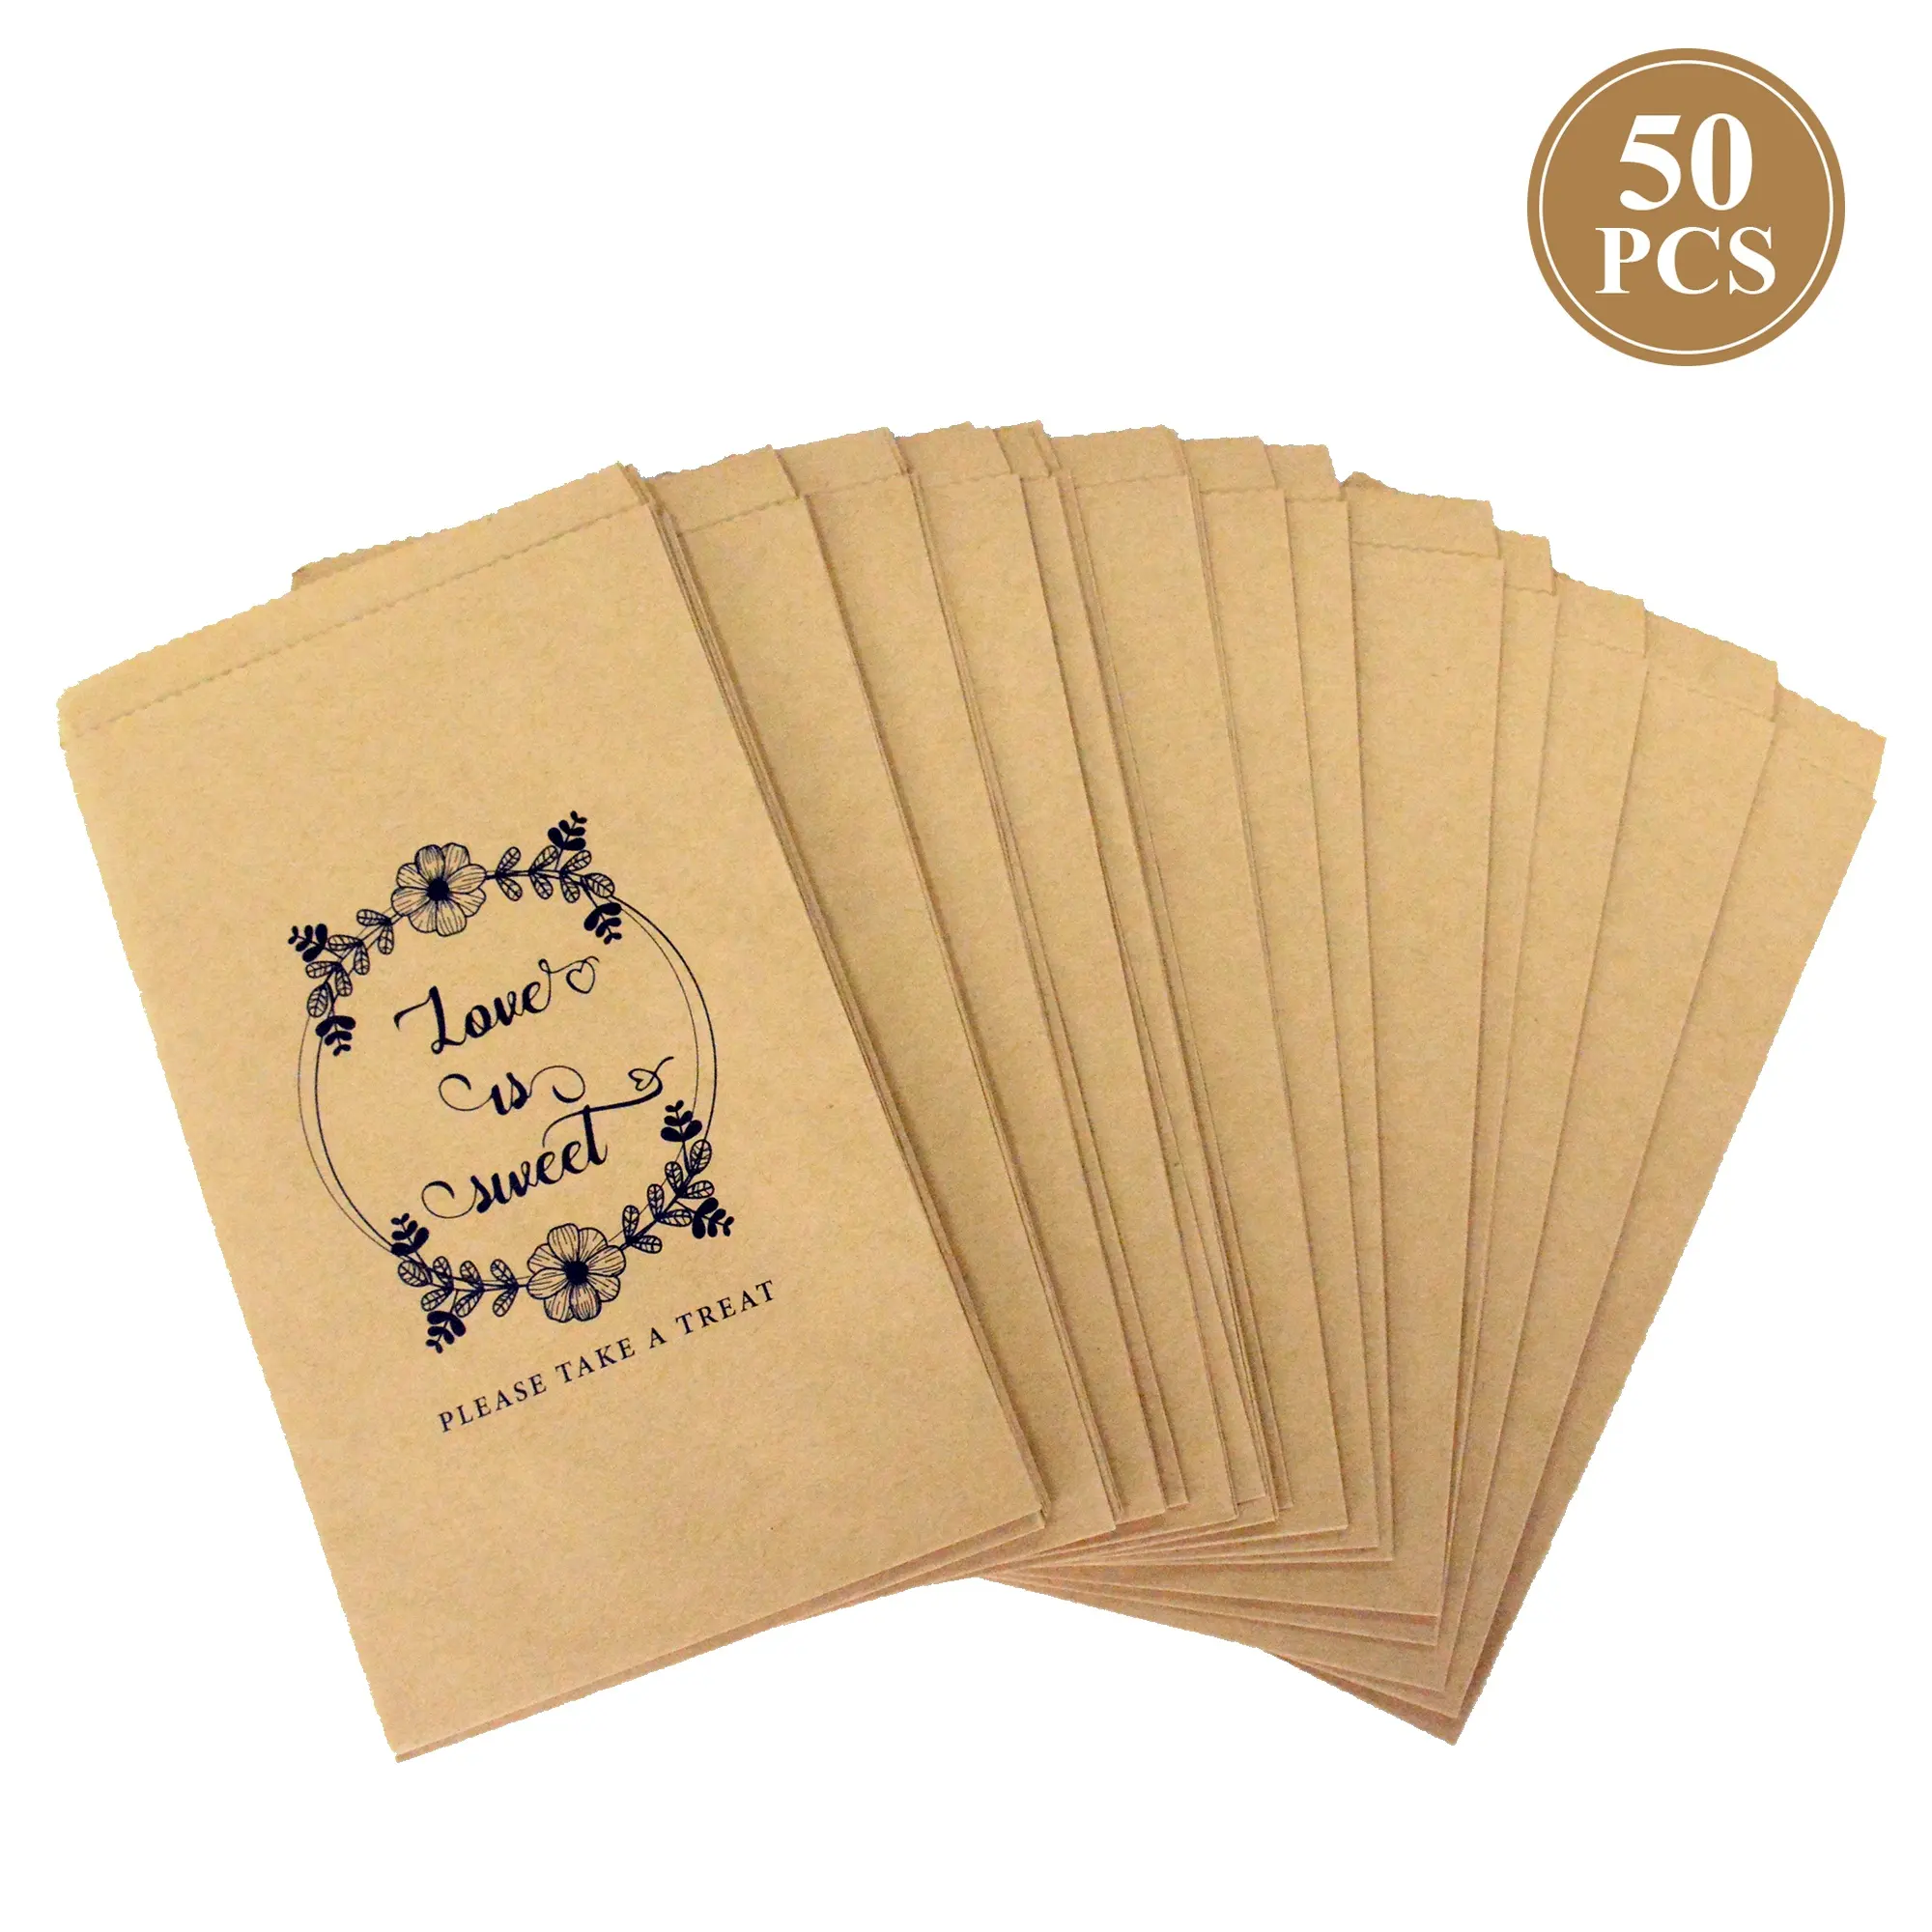 New product 50PC Kraft paper bag customize wedding favors gift bag for guest packing customize party gifts bag